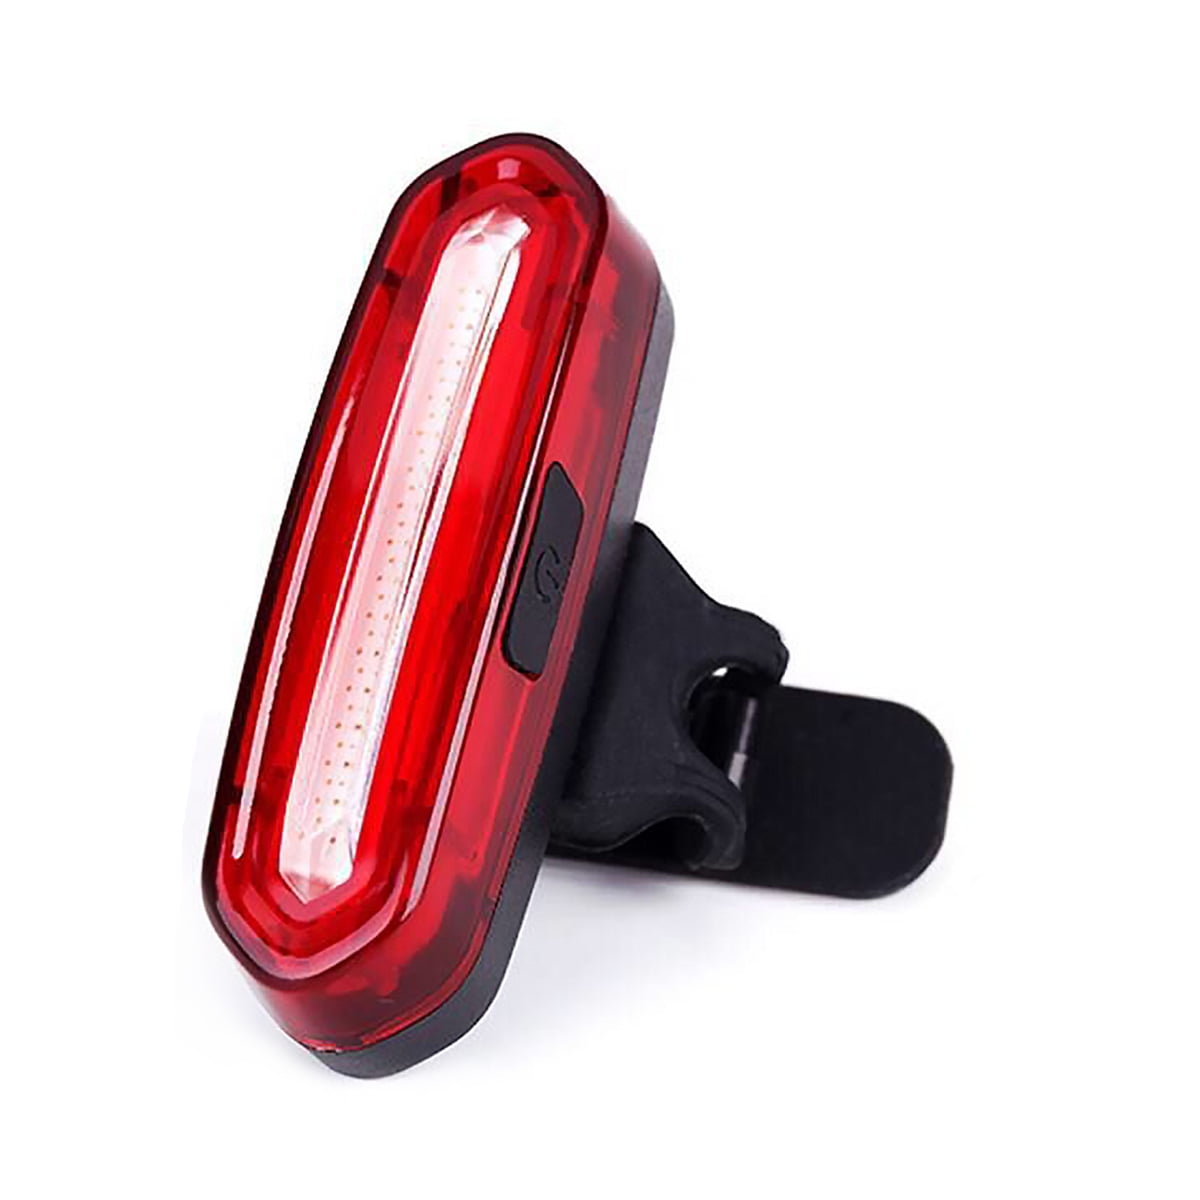 UMISHI Bike Tail Light Super Bright 100 Lumens LED Bicycle Rear Light Easily Clips on as a Red Taillight for Optimum Cycling Safety 